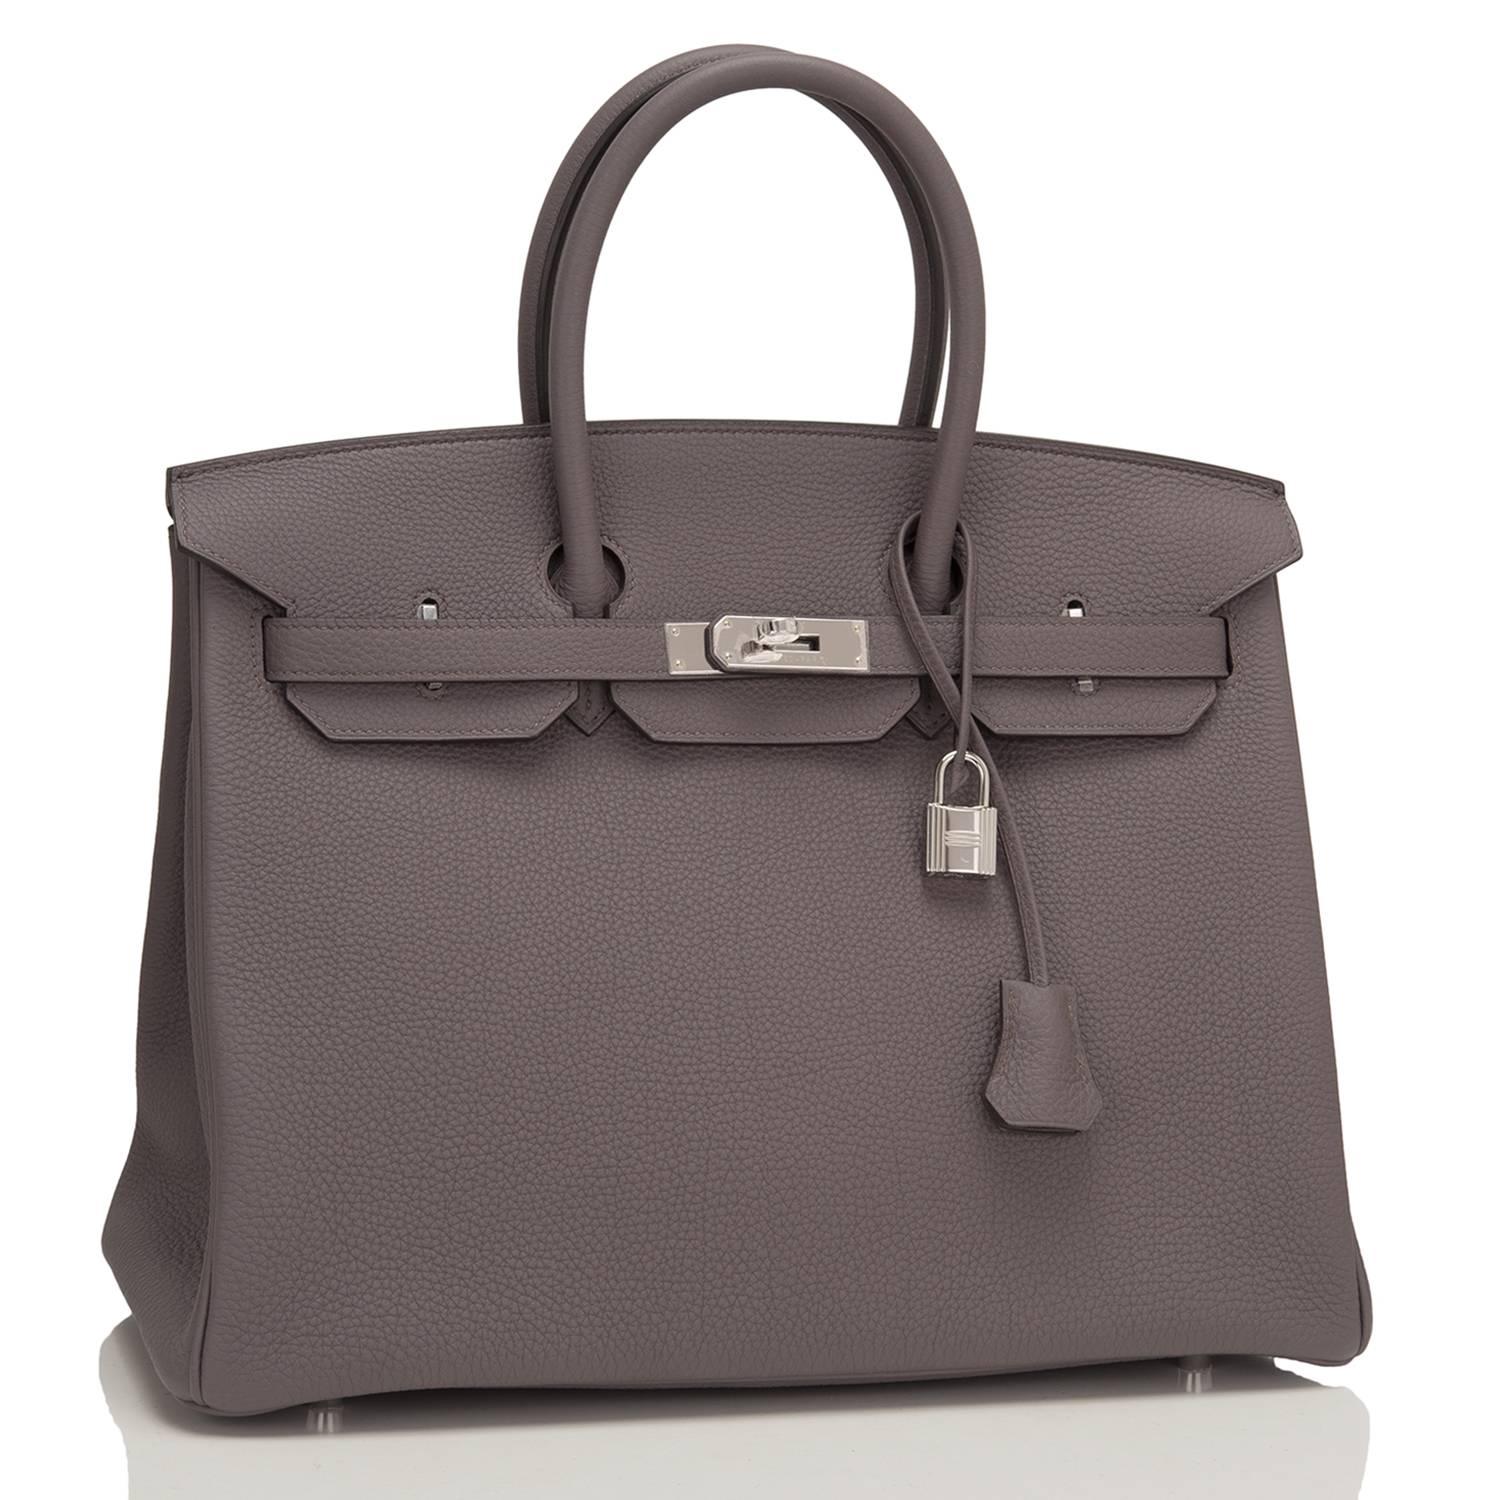 Hermes Etain 35cm of togo leather with palladium hardware.

This Birkin has tonal stitching, a front toggle closure, a clochette with lock and two keys, and double rolled handles.

The interior is lined with Etain chevre and has one zip pocket